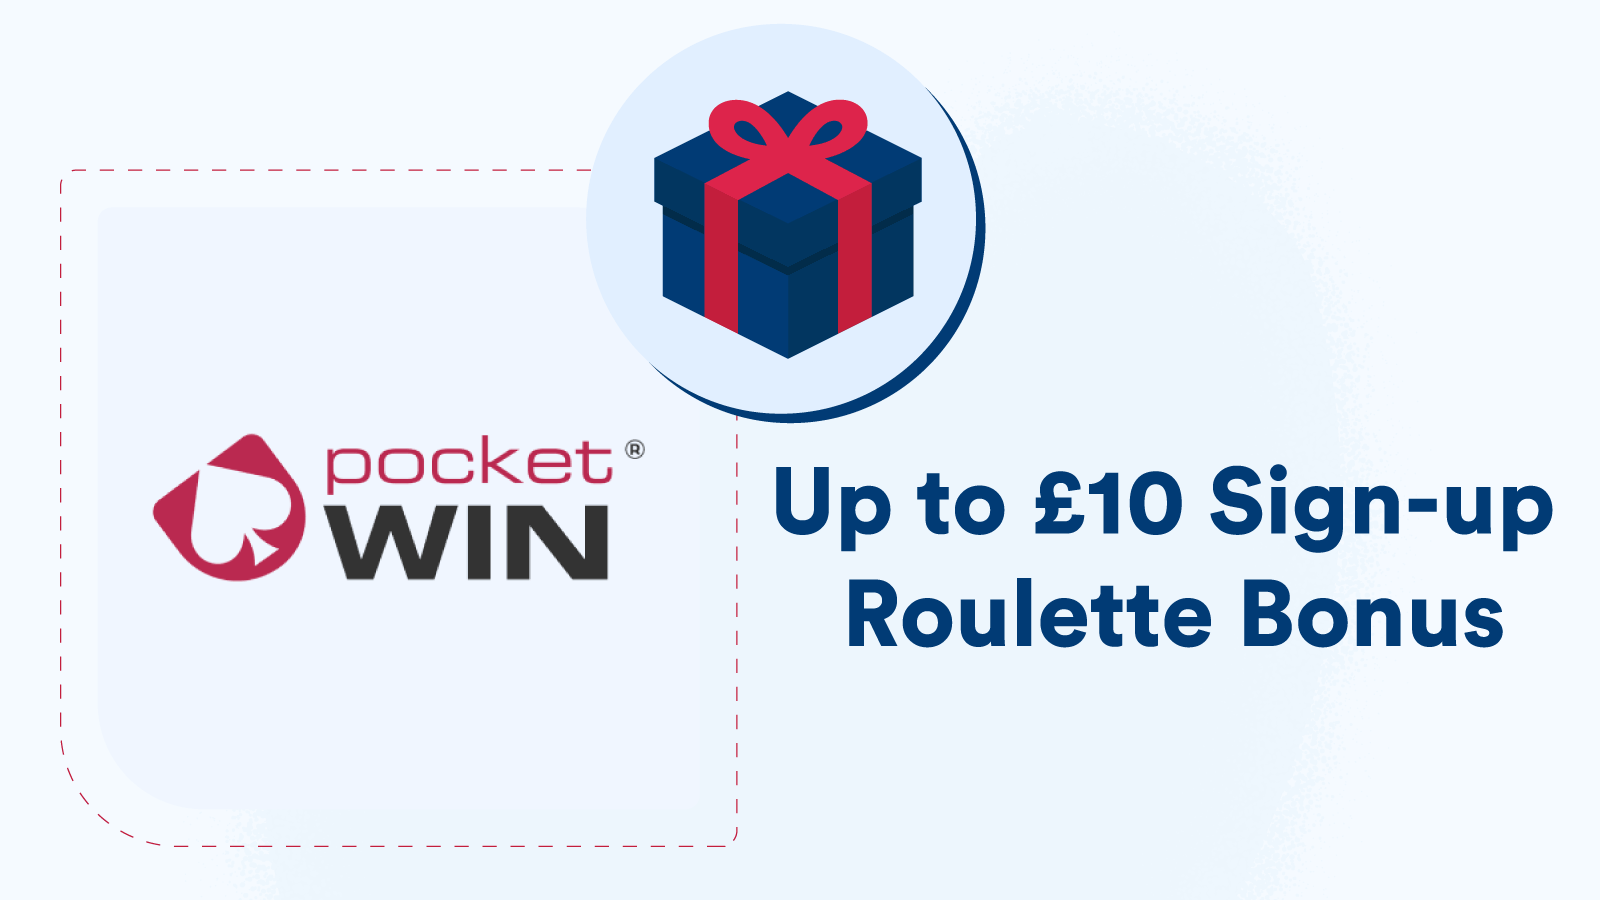 Up to £10 Sign-up Roulette Bonus at PocketWin